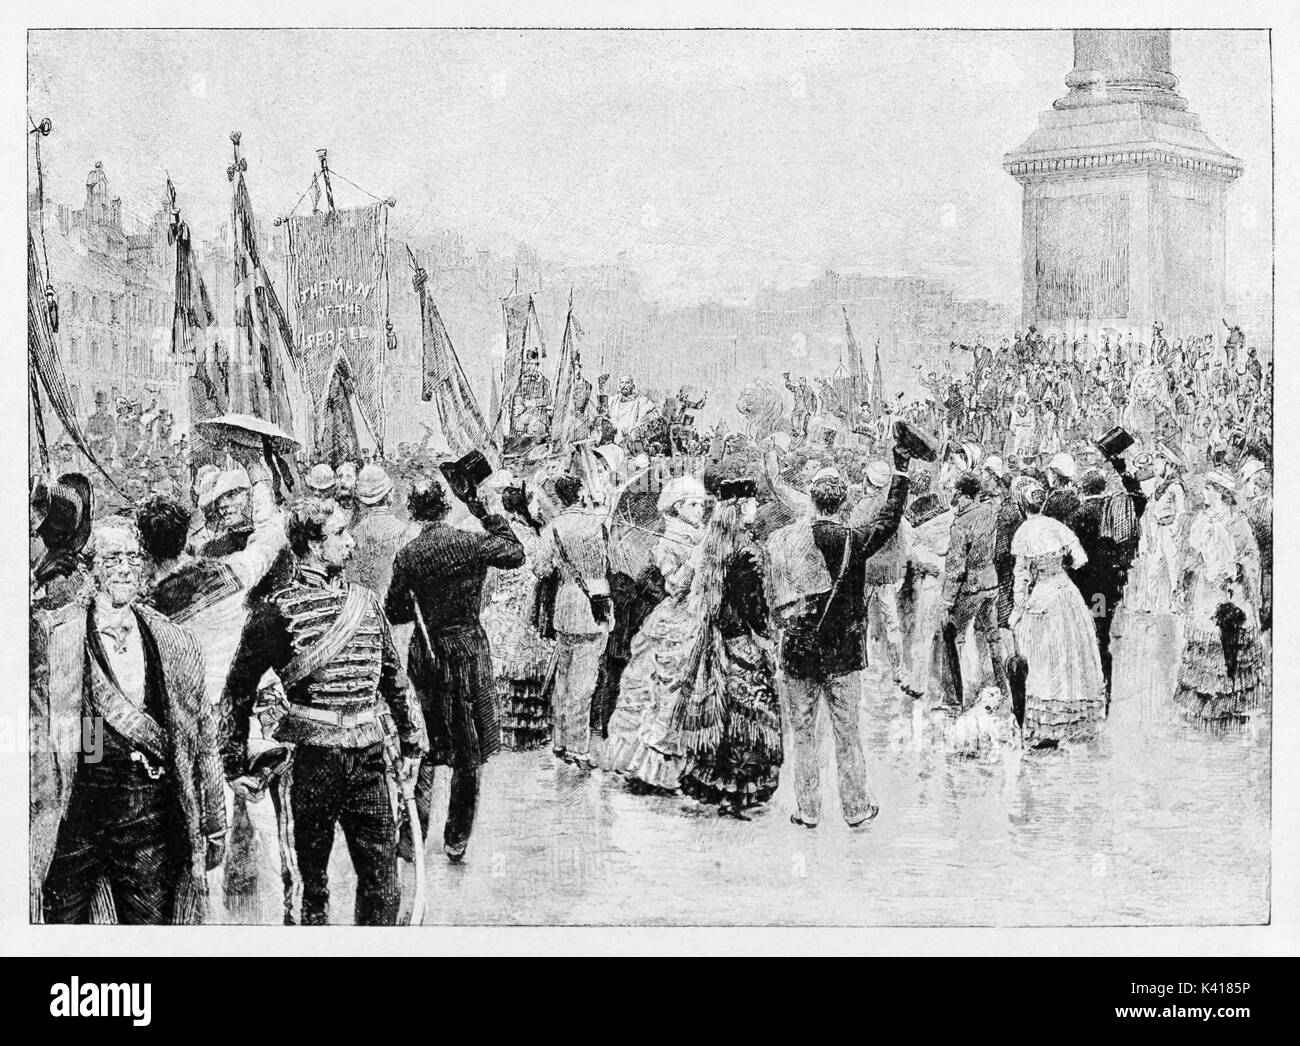 Crowd of ancient people displayed in back view greets Garibaldi solemn entrance in London. By E. Matania published on Garibaldi e i Suoi Tempi Milan Italy 1884 Stock Photo